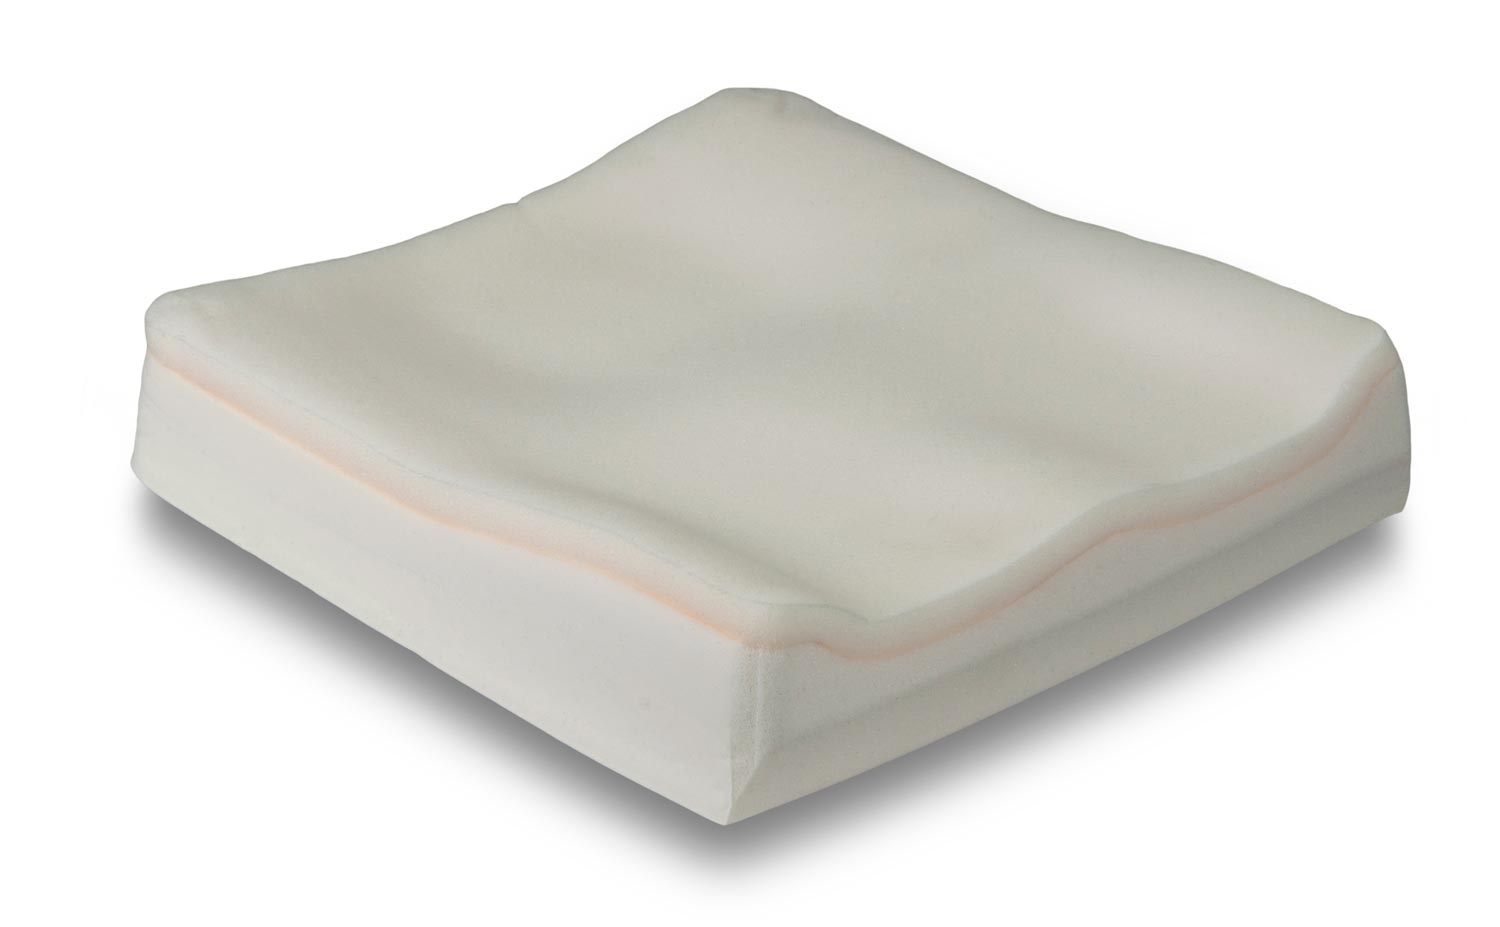 Soft Foam Base with Varying Firmness